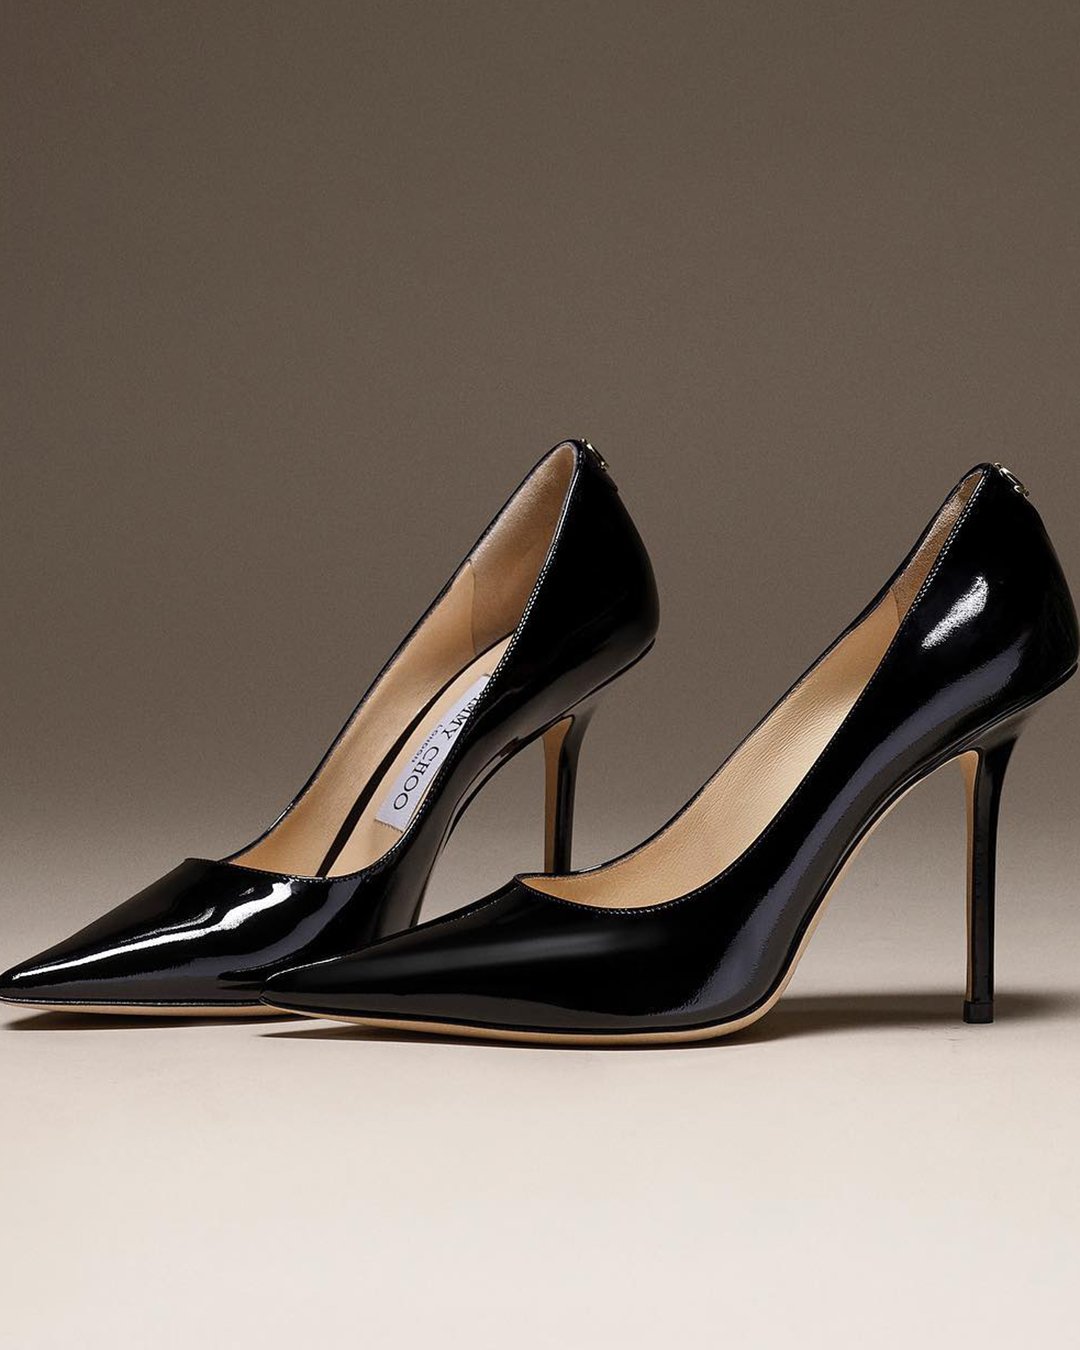 black shoes for wedding simple with heels jimmychoo